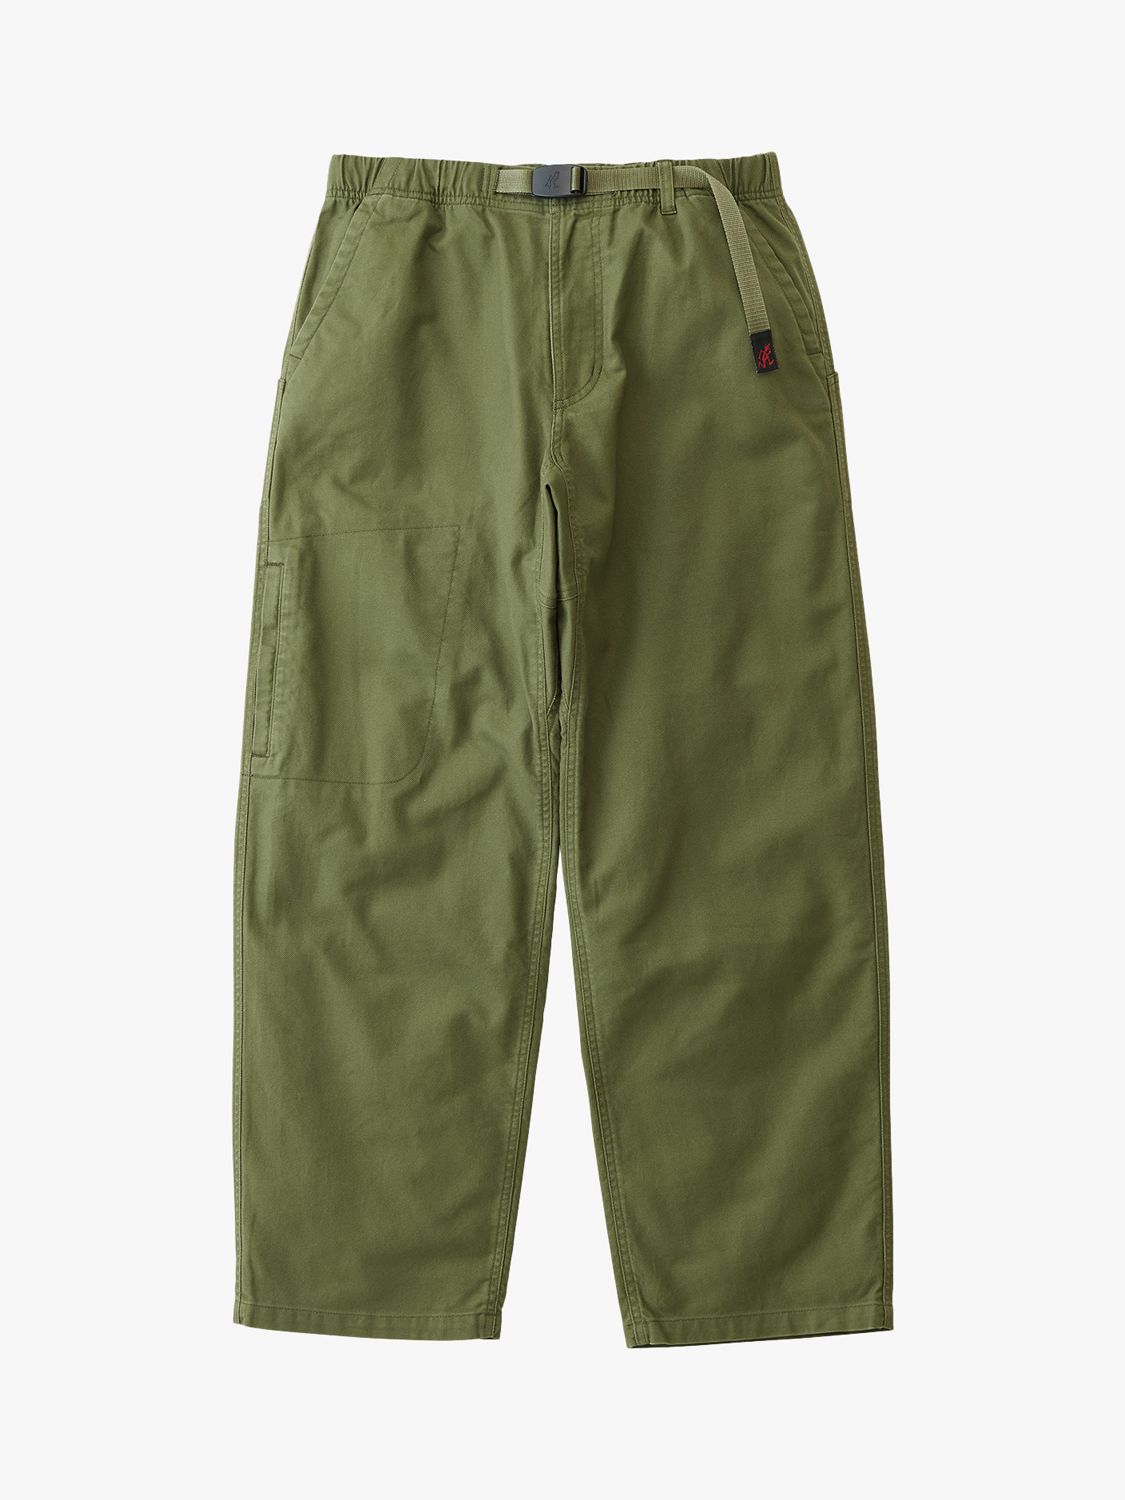 Buy Gramicci Ground Up Cargo Trousers, Olive Online at johnlewis.com